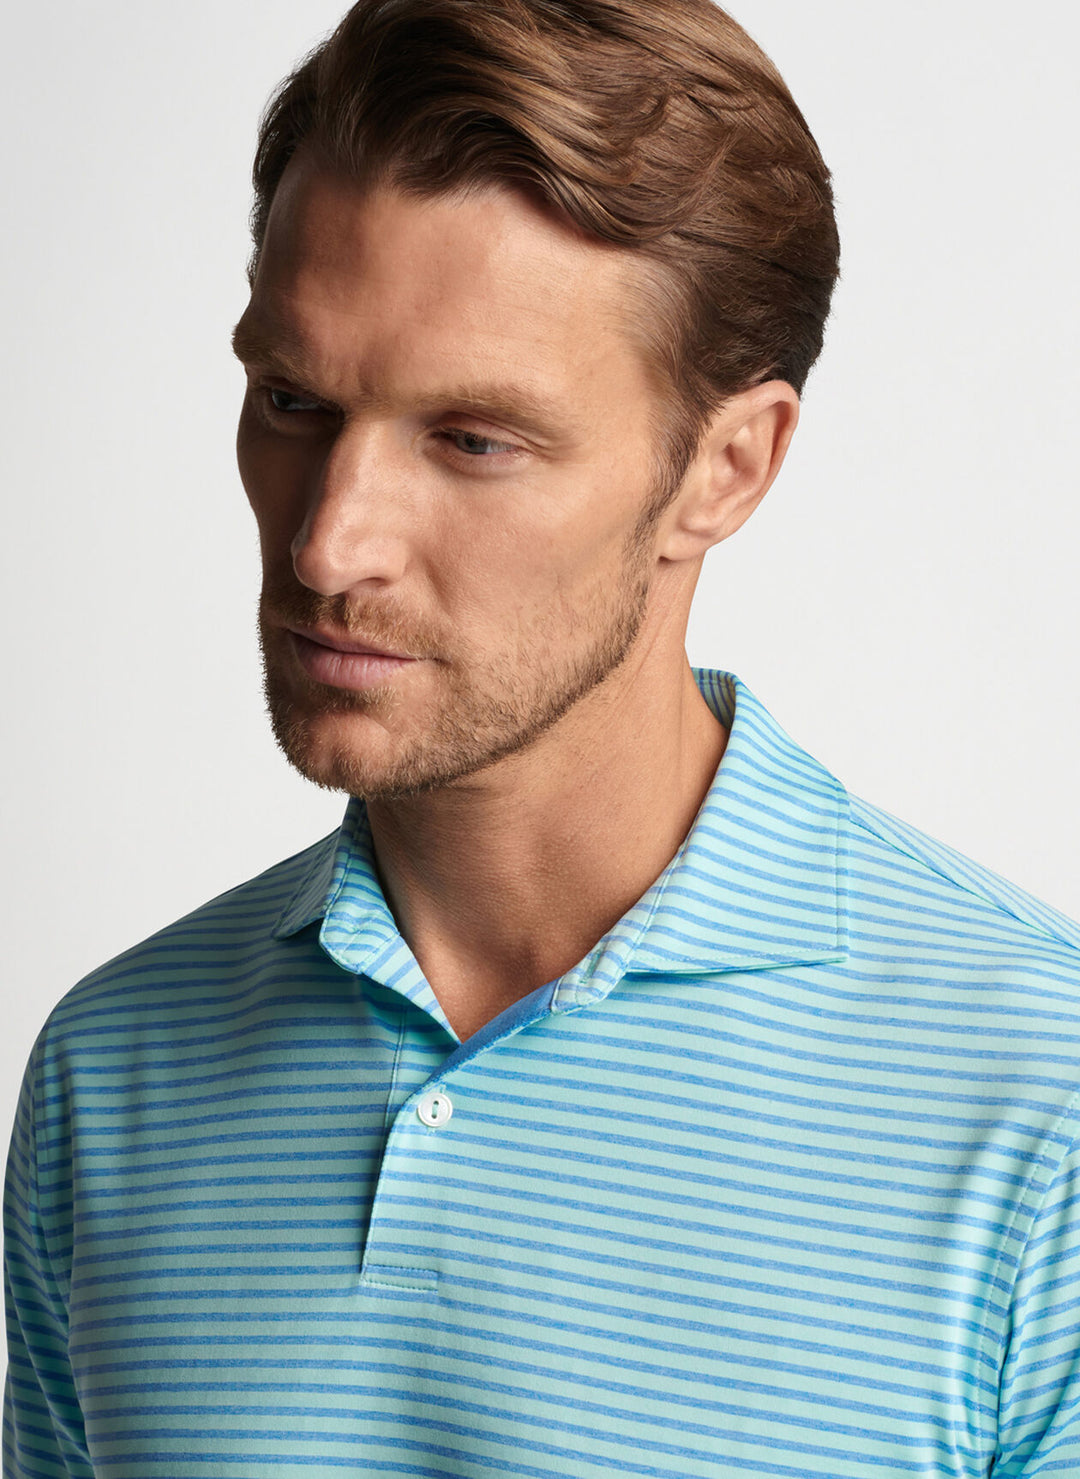 Miles Performance Jersey Polo